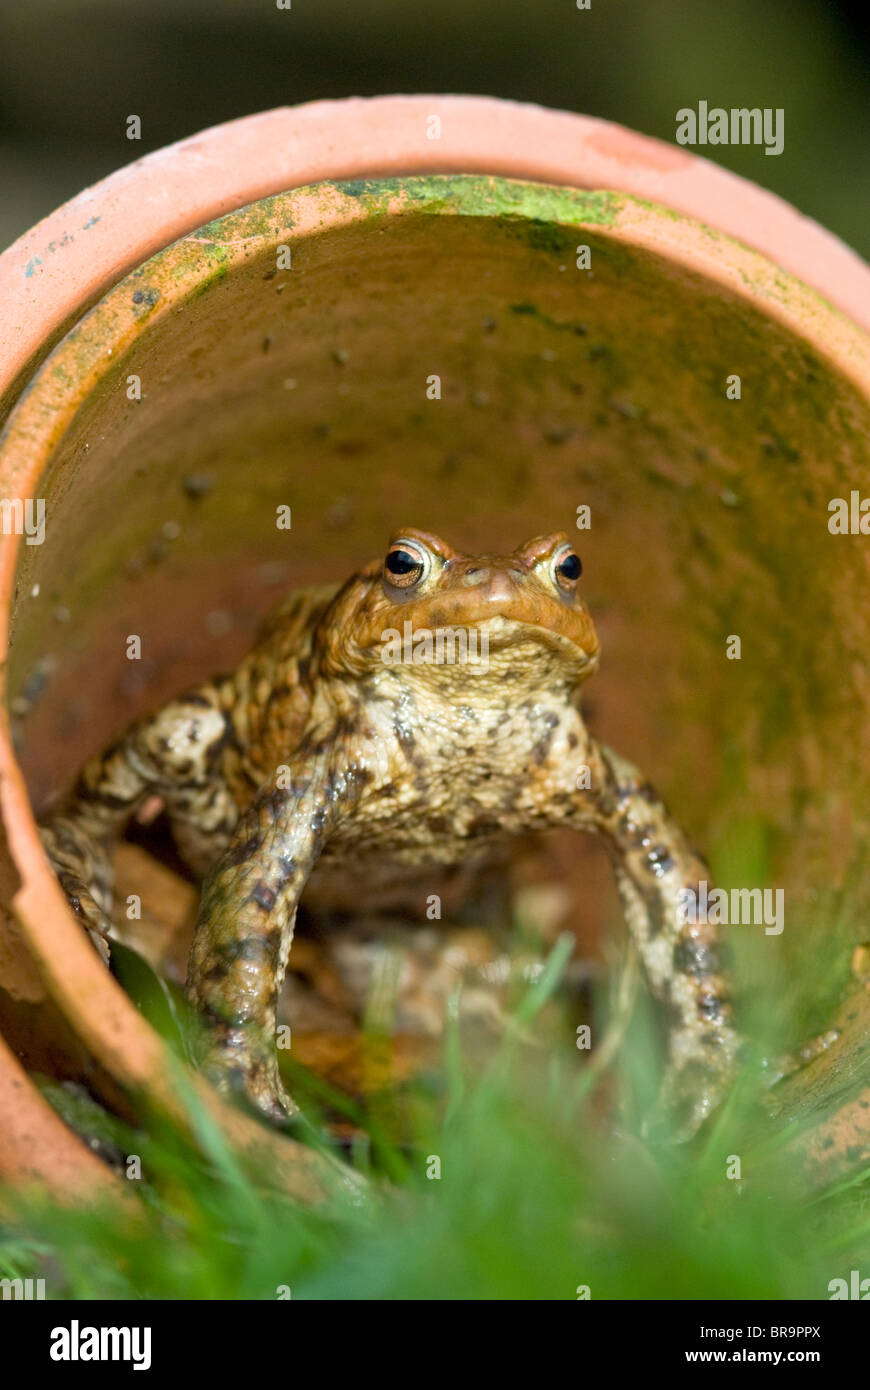 Crapaud commun Bufo bufo Banque D'Images